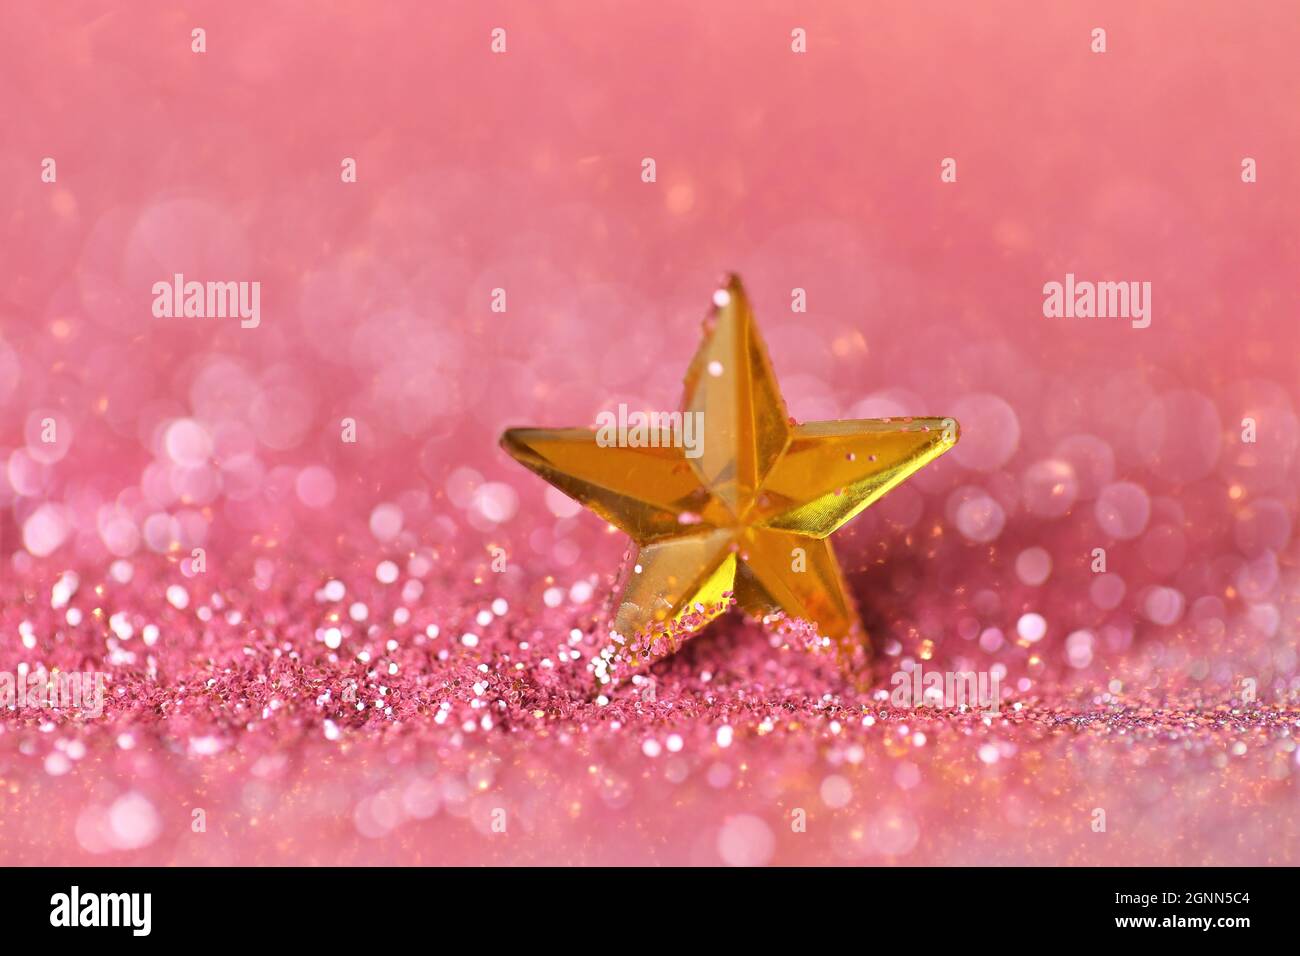 Wallpaper shining glitter.New Year and Christmas background. gold star in pink glitter on shining background.Beautiful festive background in rose gold Stock Photo